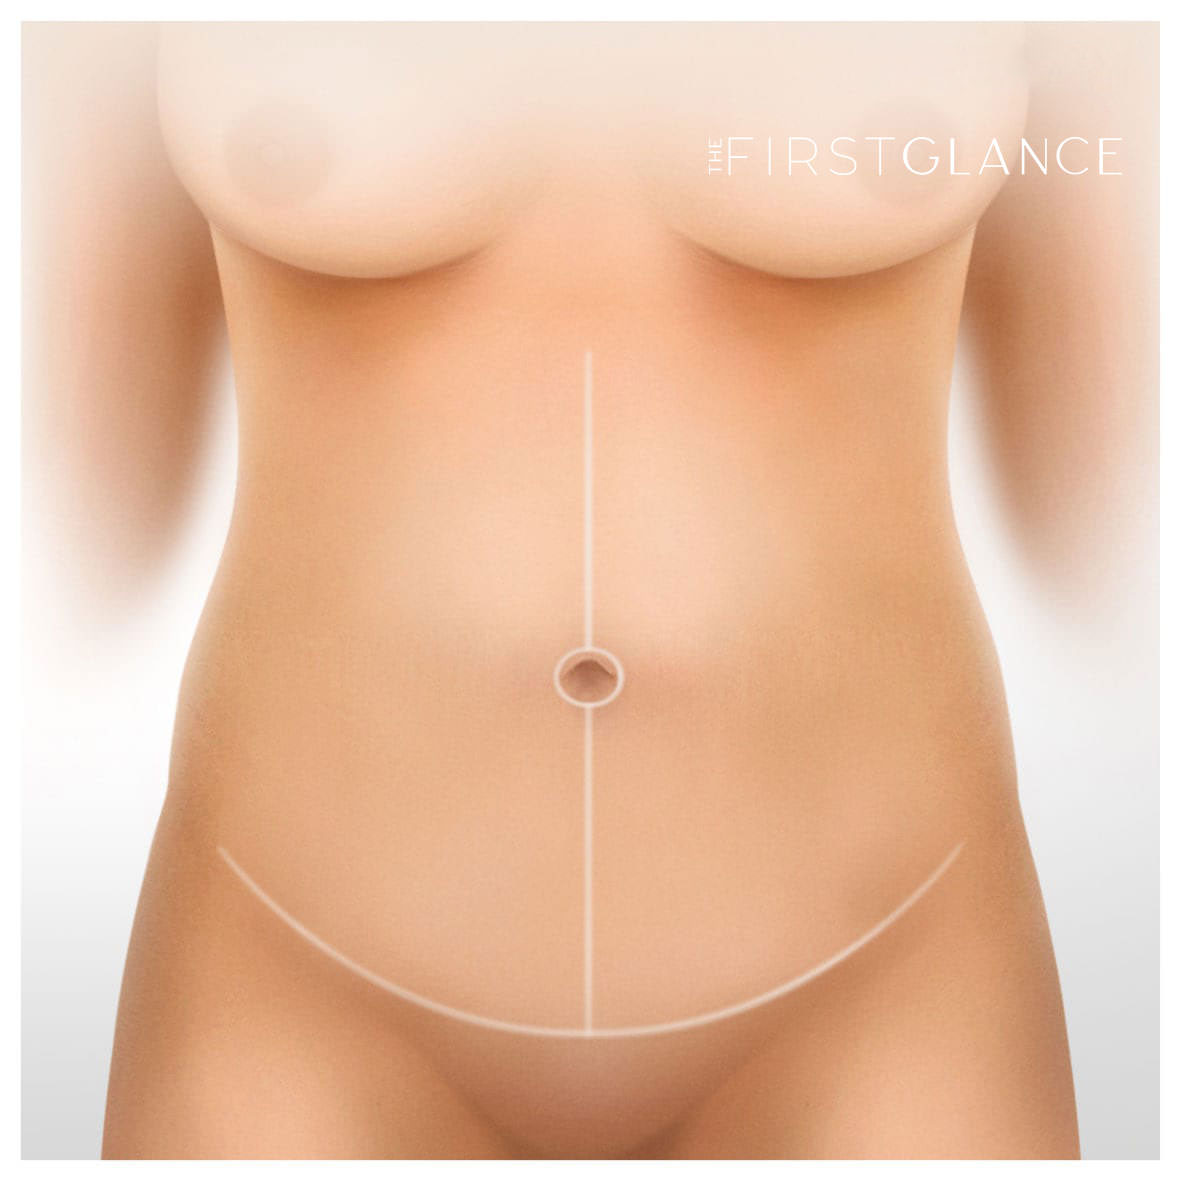 First Glance Aesthetic Clinic Fleur De Lys Tummy Tuck after